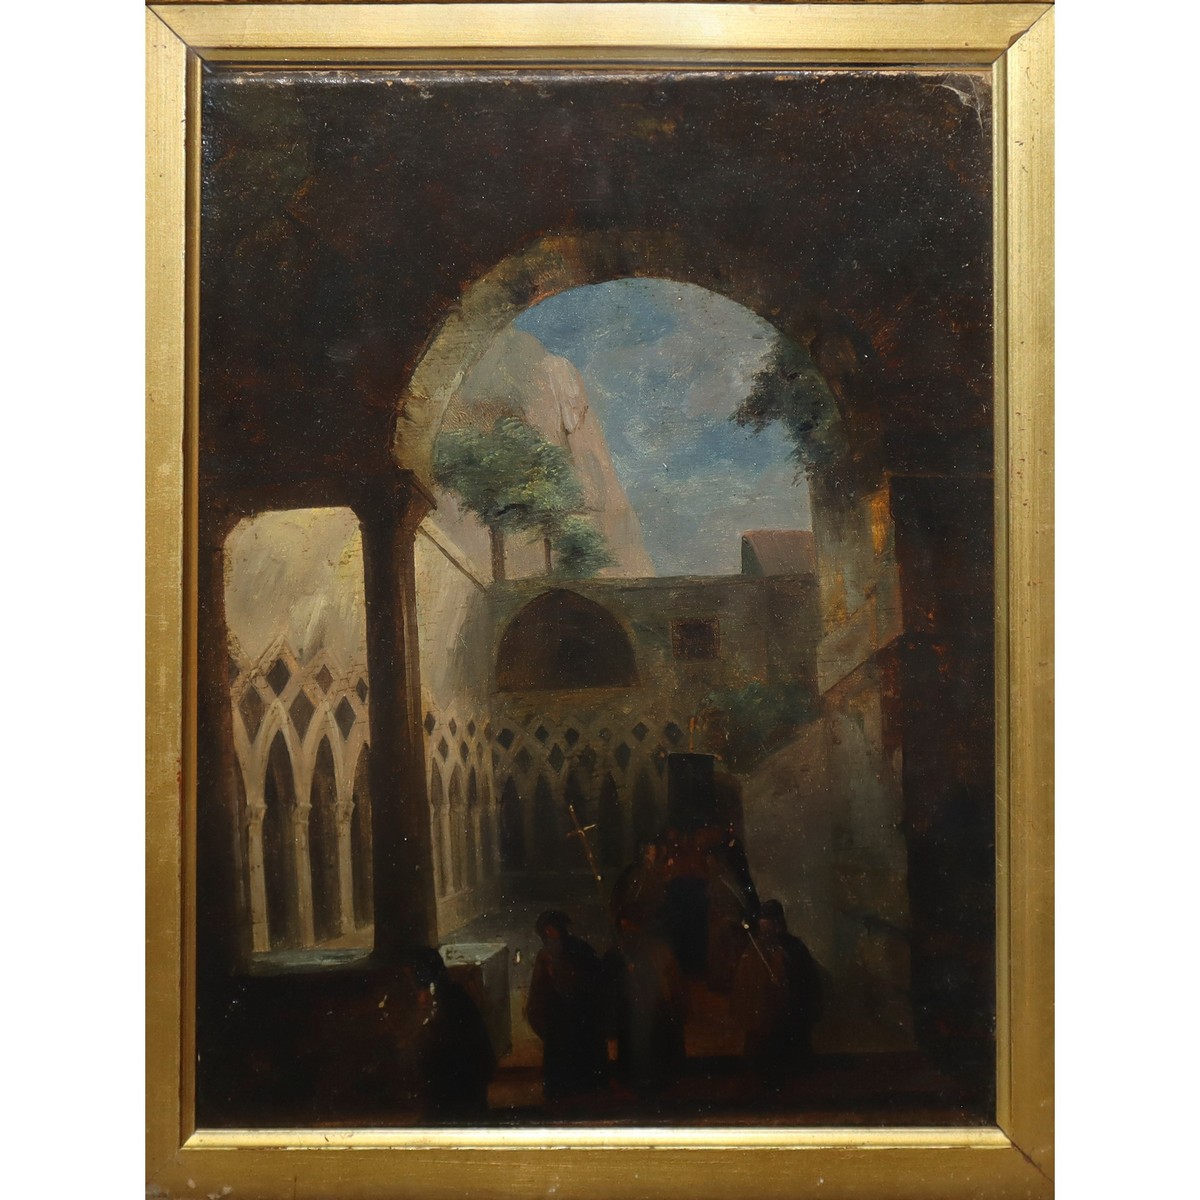 Vincenzo Abbati (Napoli 1803-Firenze 1866) - Cloister with friars - Image 2 of 4